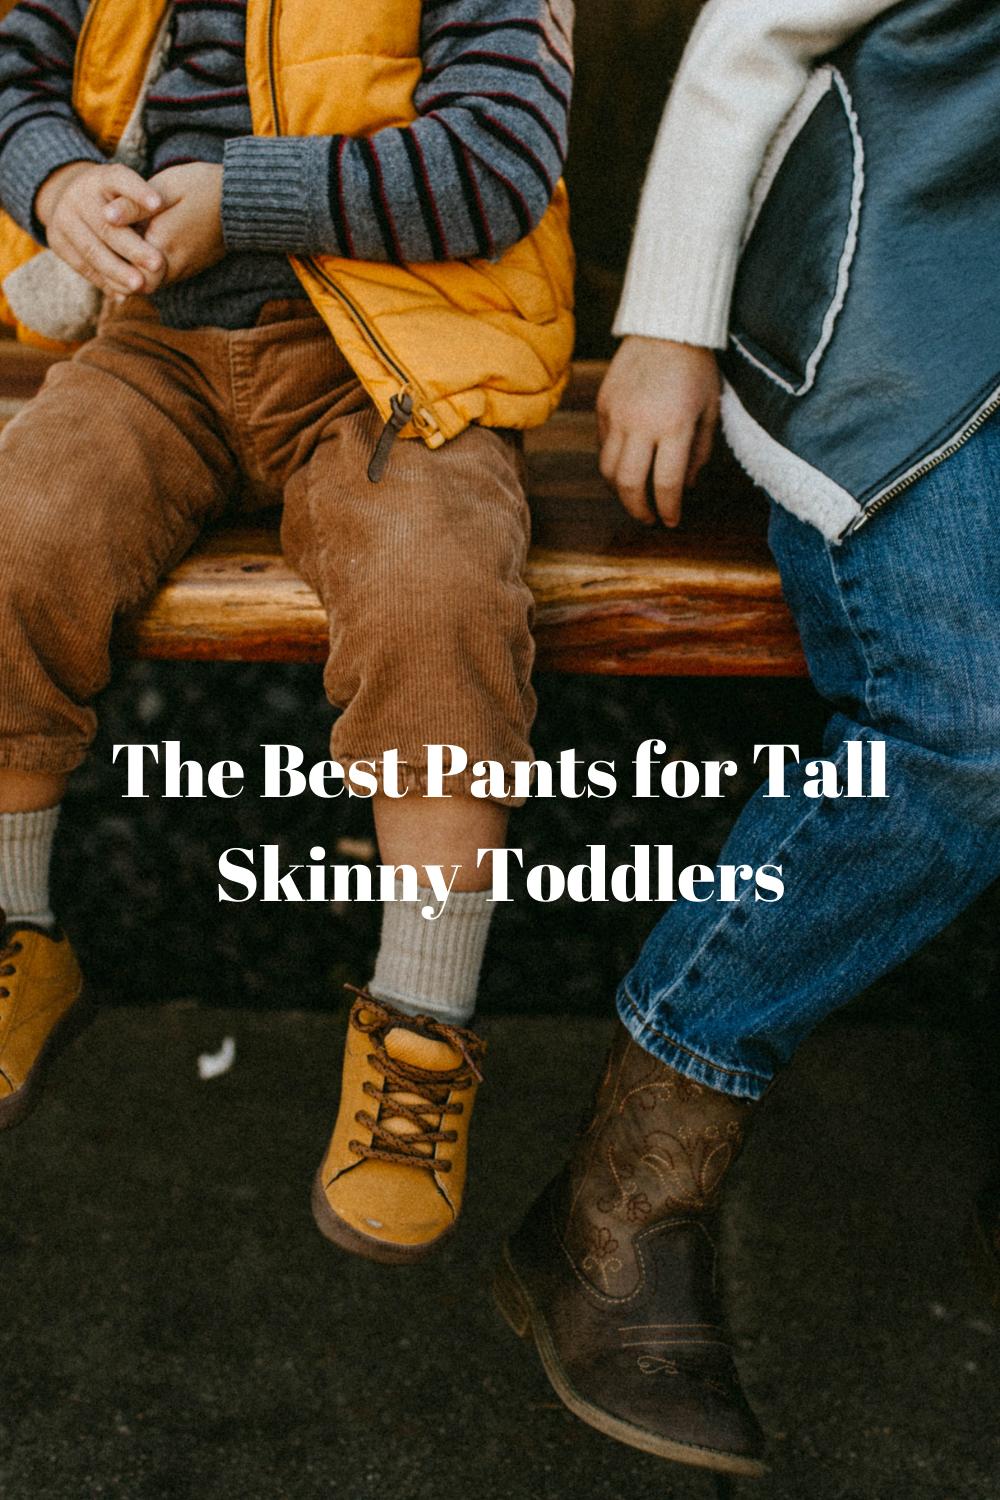 The Best Pants for Tall Skinny Toddlers